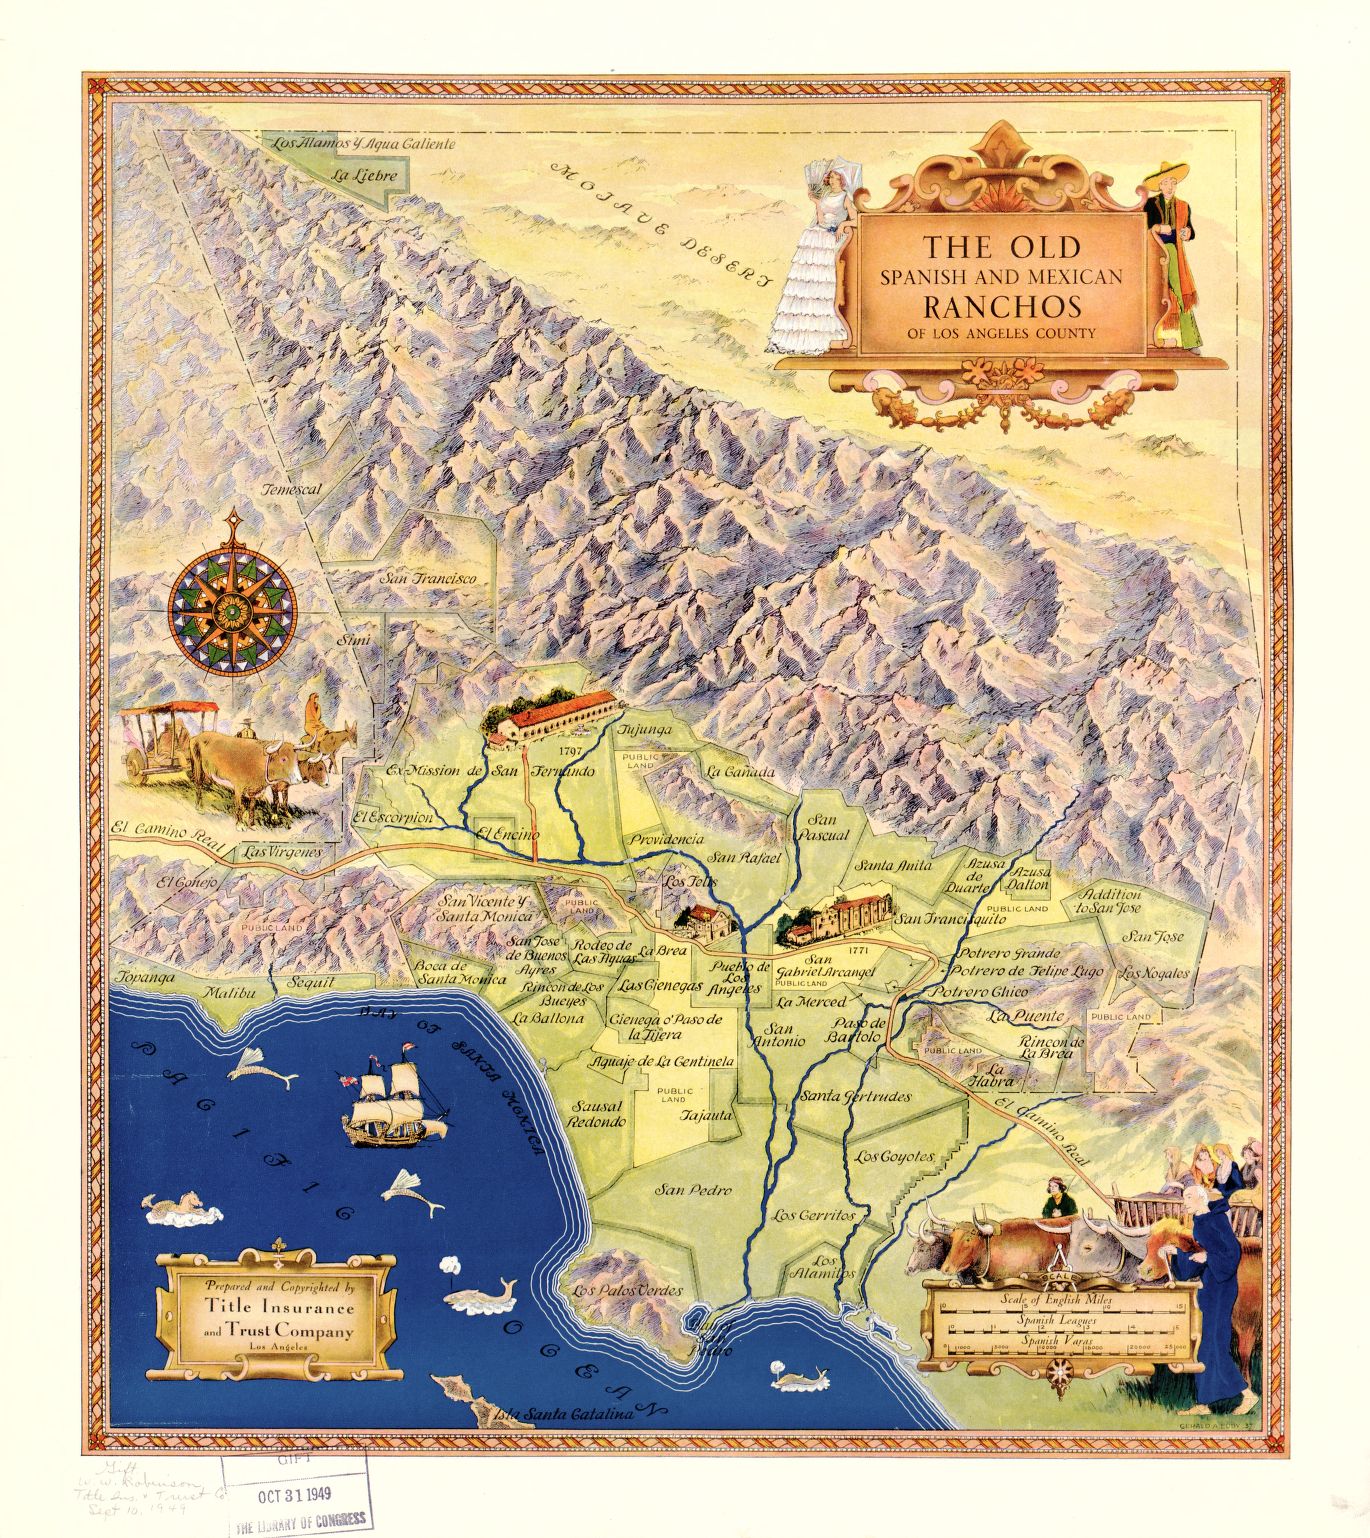 A map of old ranchos in Southern California